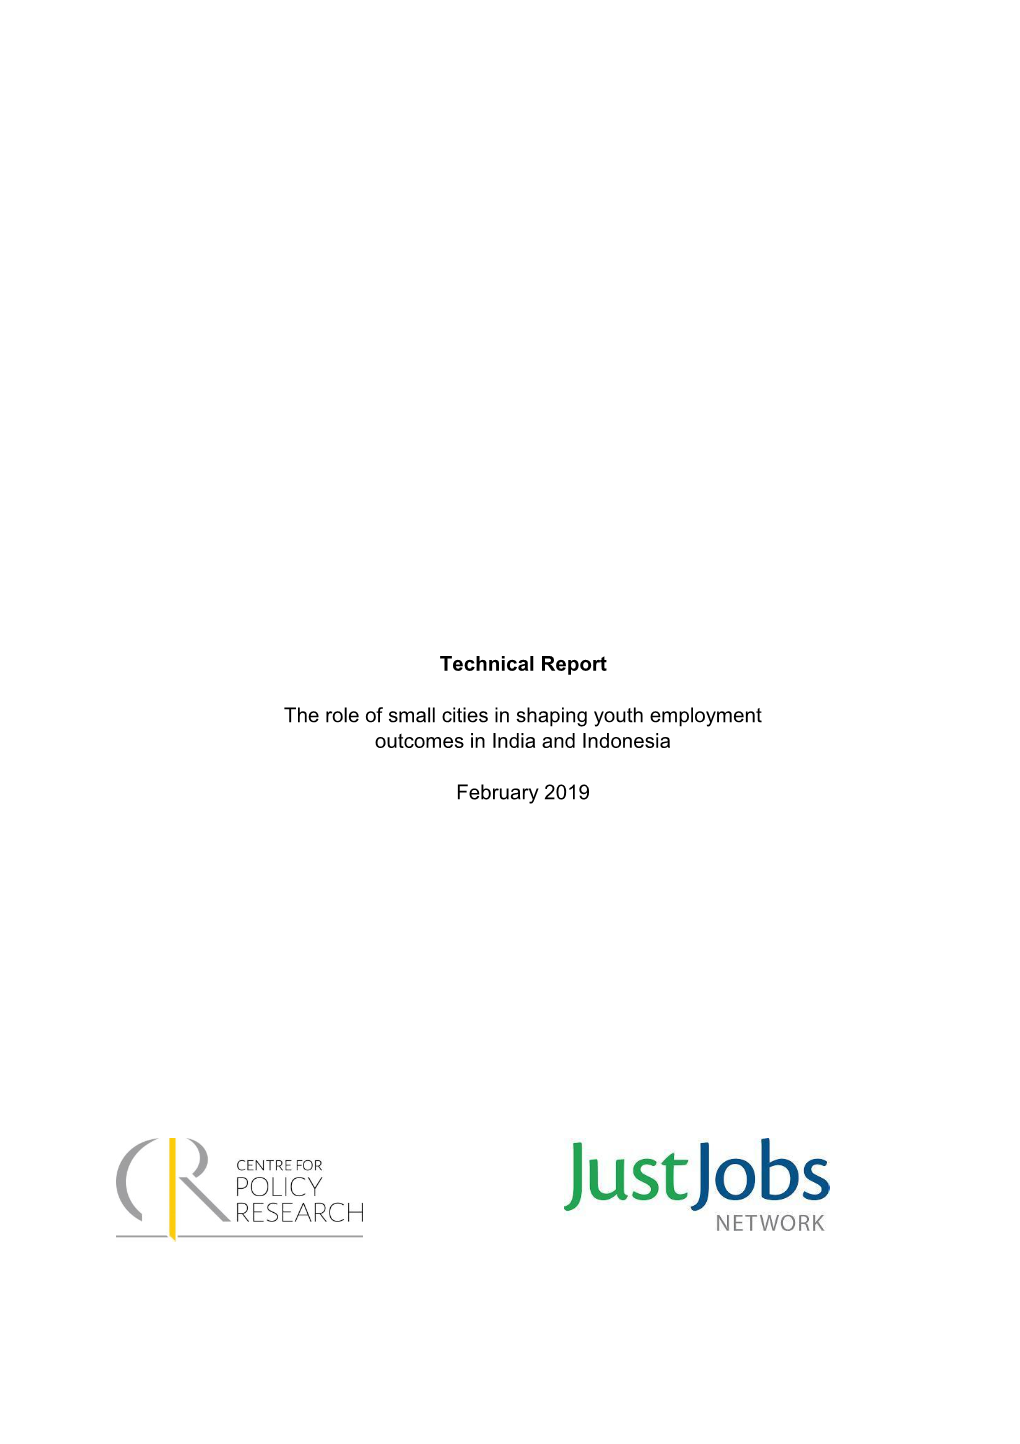 Technical Report the Role of Small Cities in Shaping Youth Employment